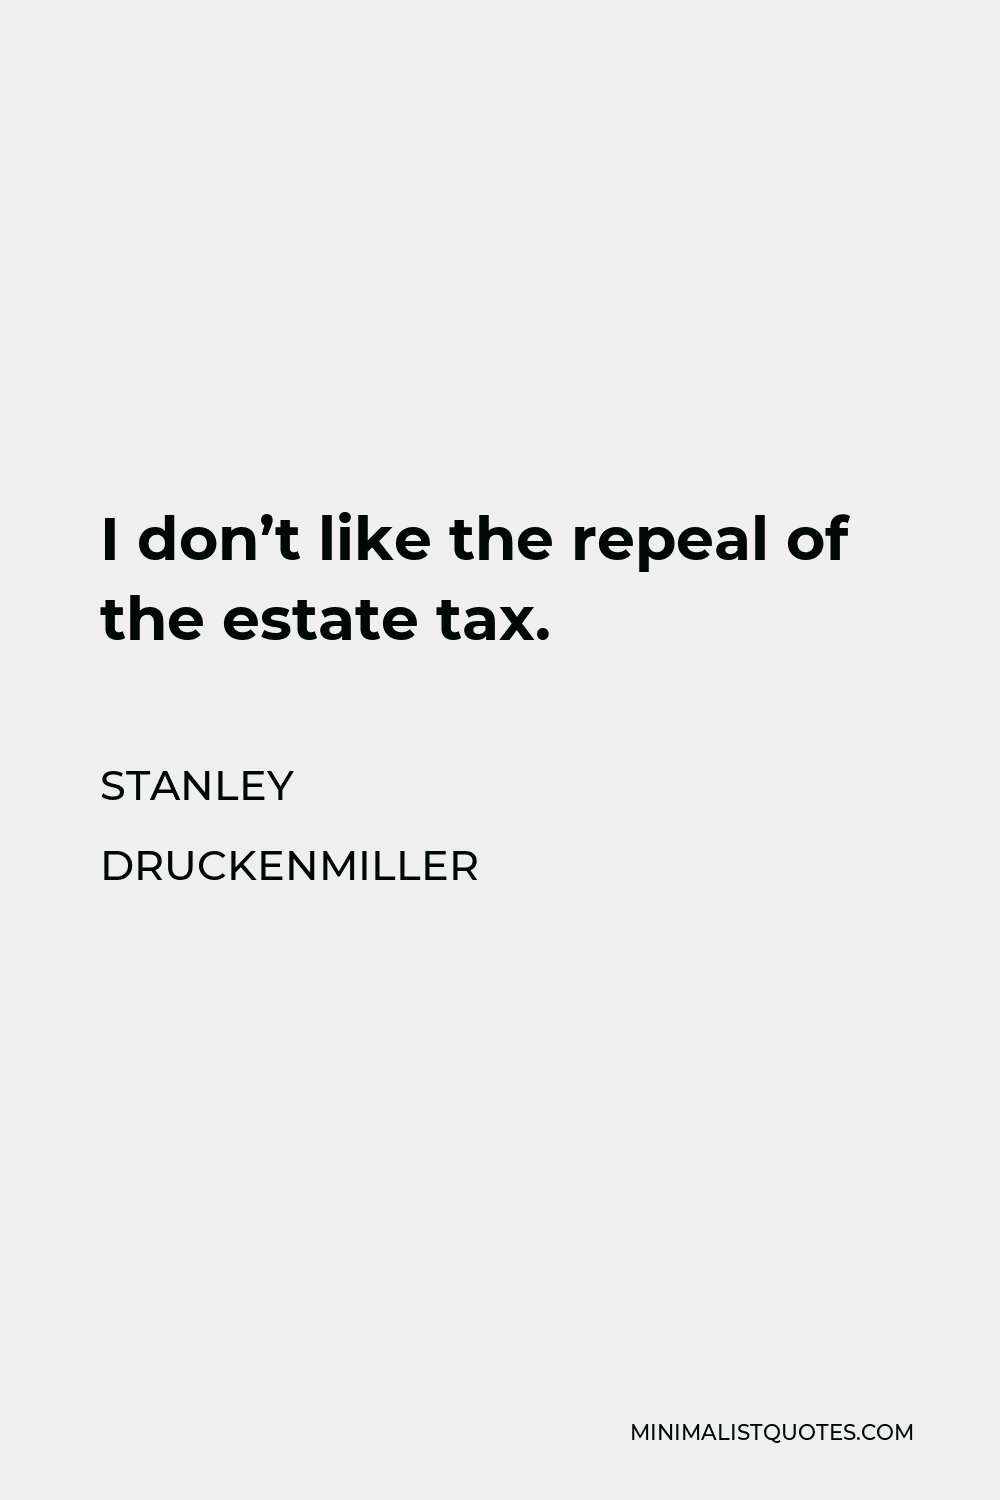 Stanley Druckenmiller Quote - I don’t like the repeal of the estate tax.